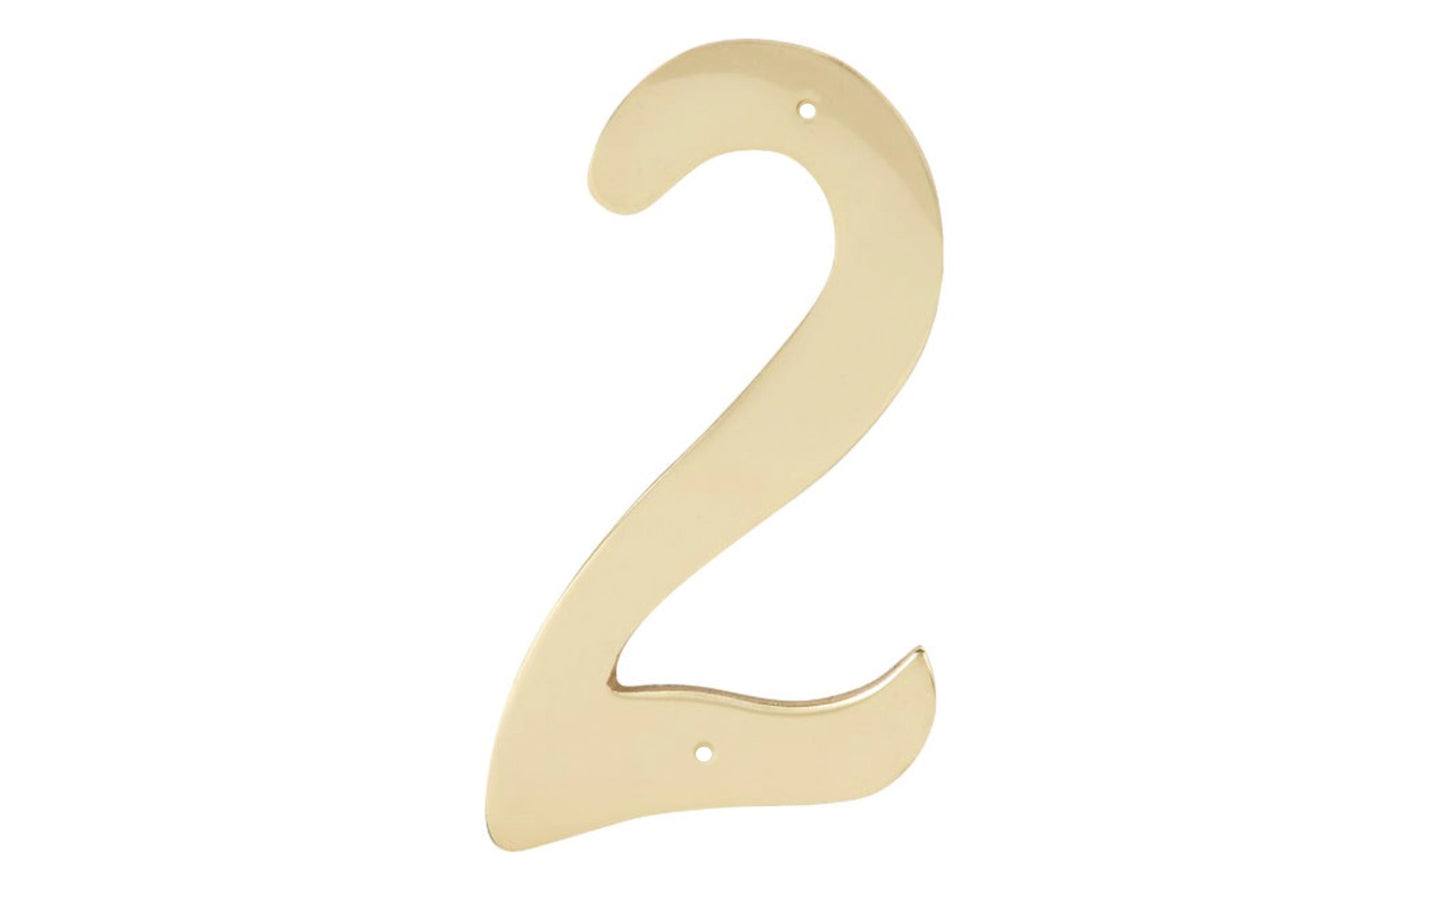 Number Two Solid Brass House Number in a 4" size. Made of solid brass material - 1/16" thickness. Lacquered brass finish. Mounting nails included. #2 House Number. Hy-Ko Model No. BR-40/2. 029069200923